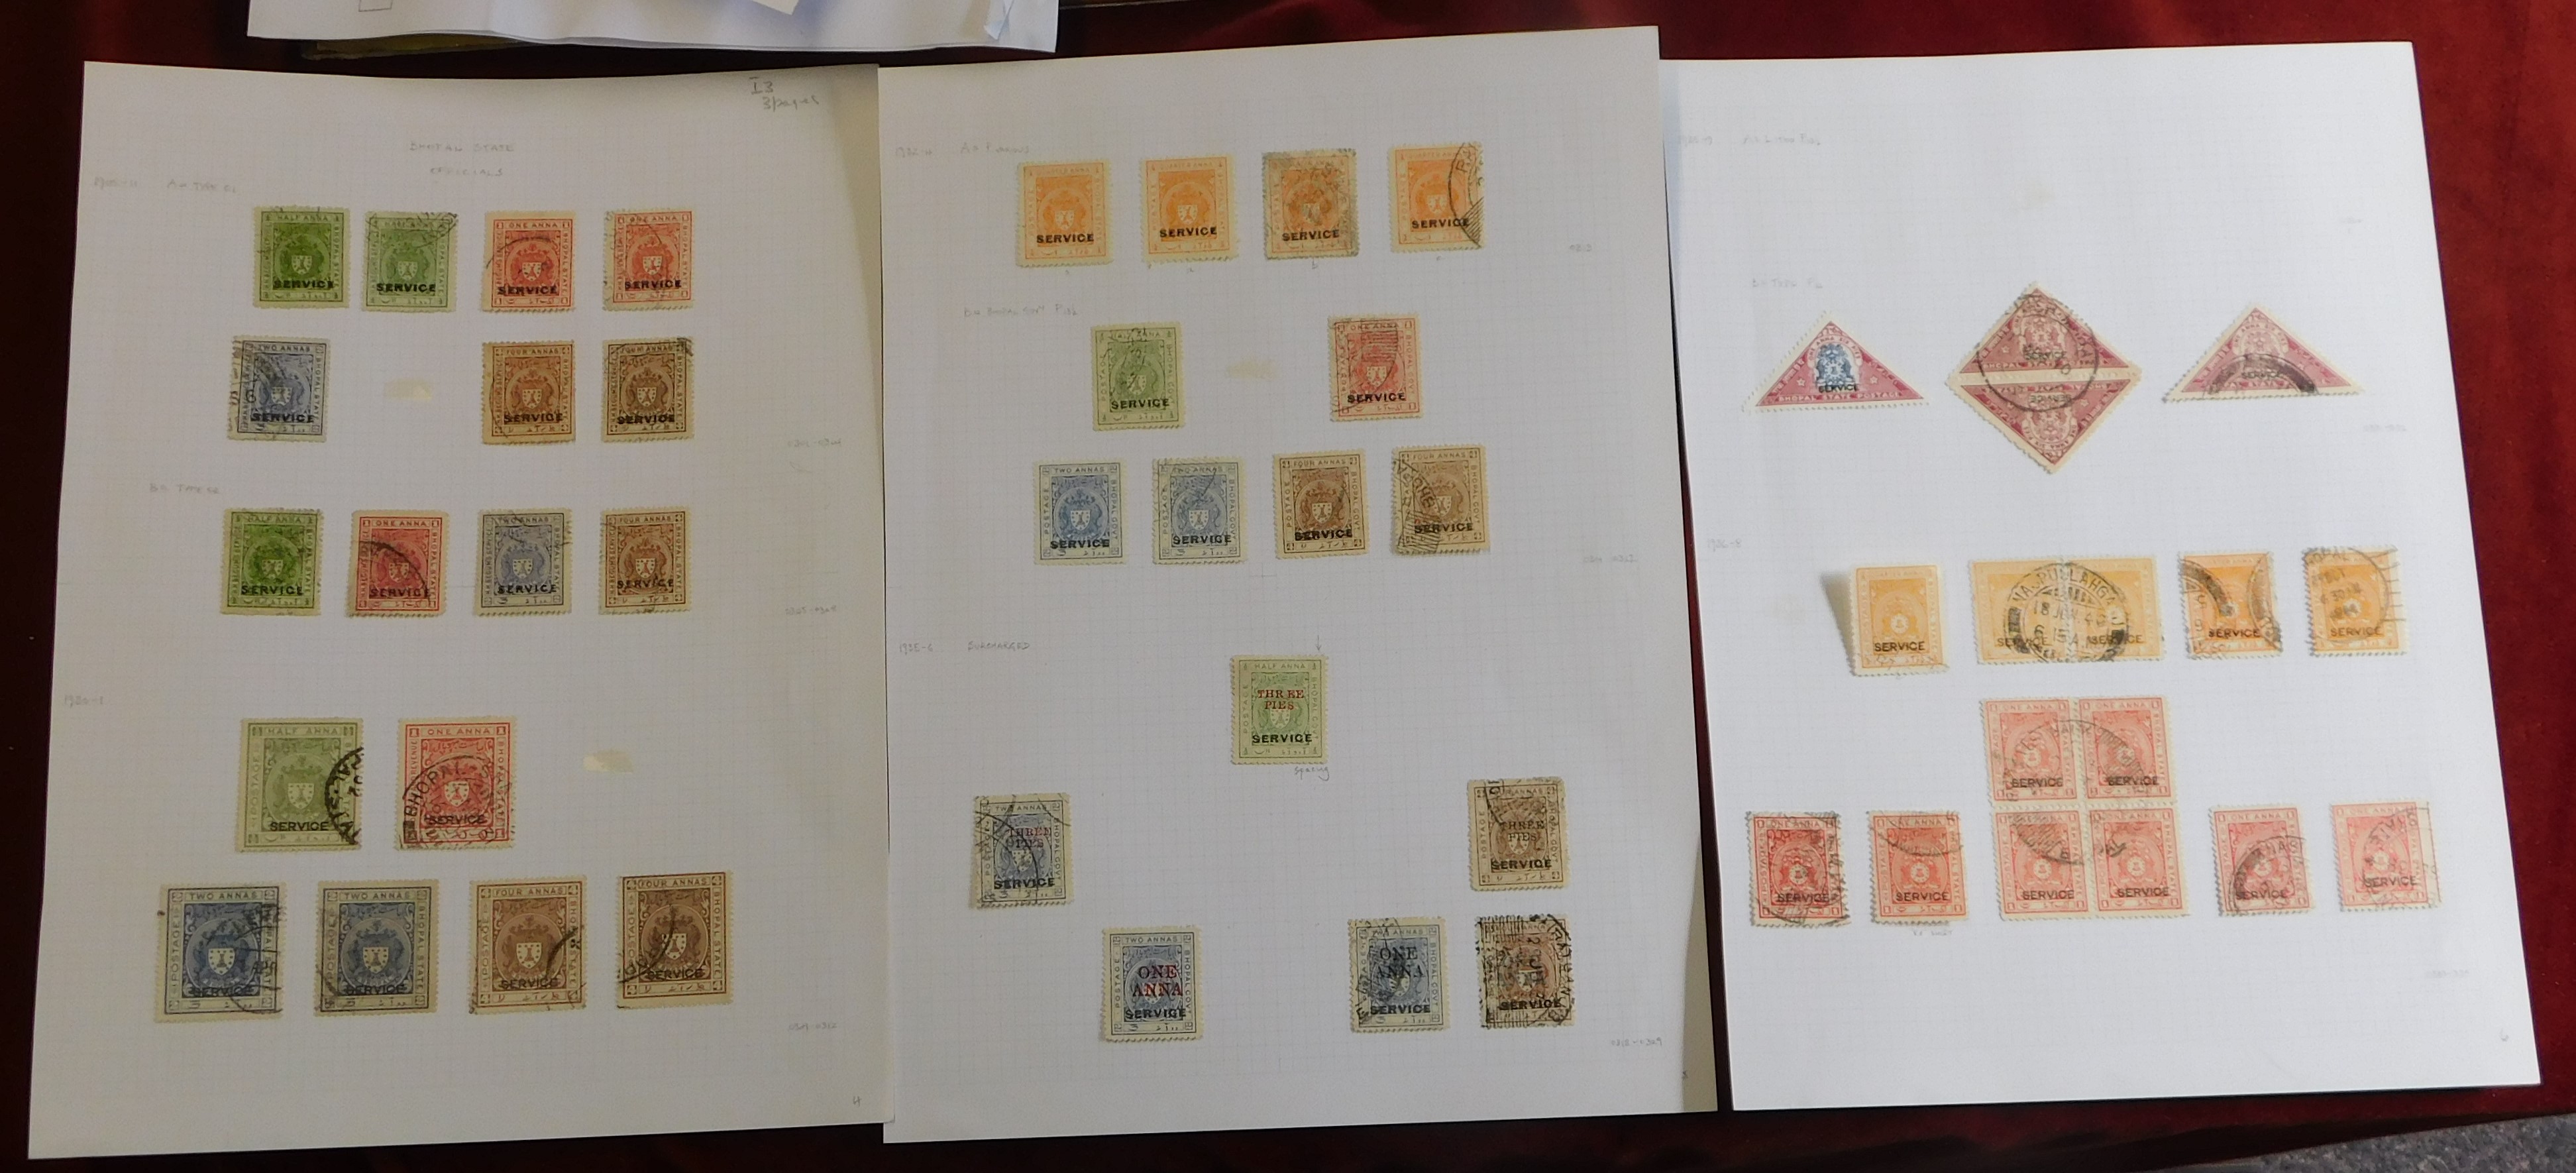 India (Bhopal State) Officials 1908-1938 mainly fine used on three album pages, includes